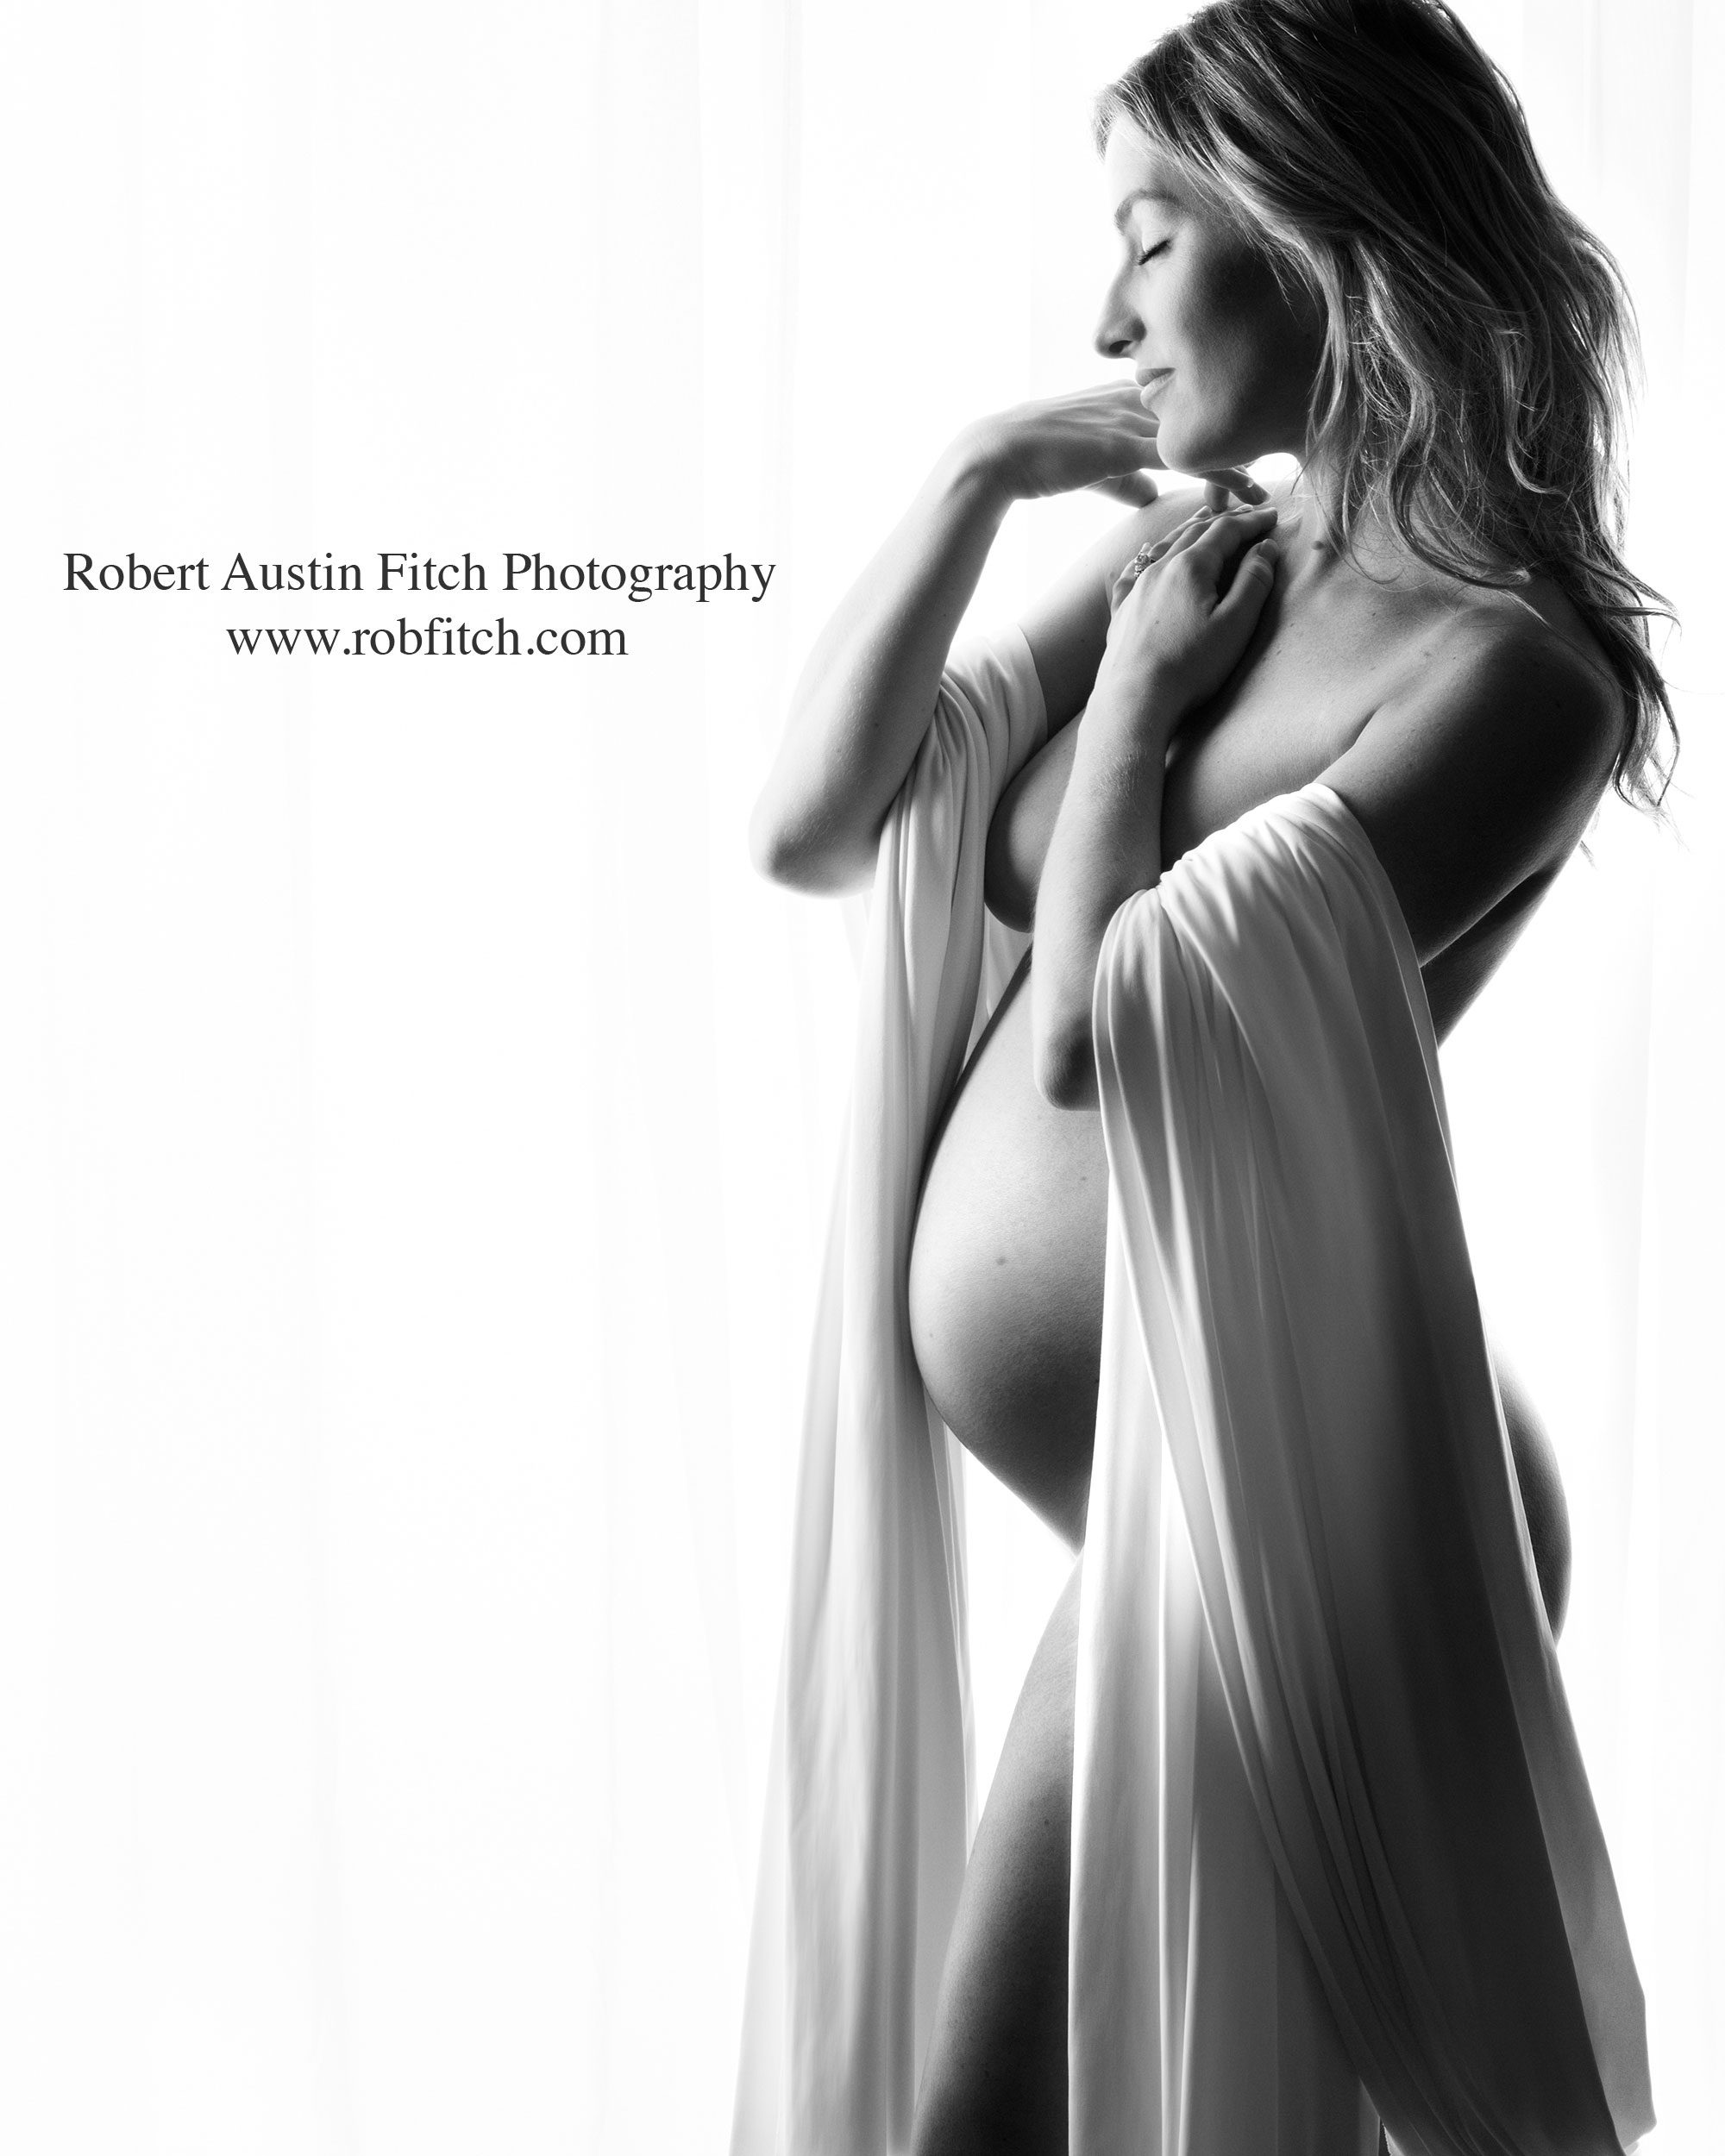 Artistic B&W Silhouette Maternity Photo by Robert Austin Fitch Photography